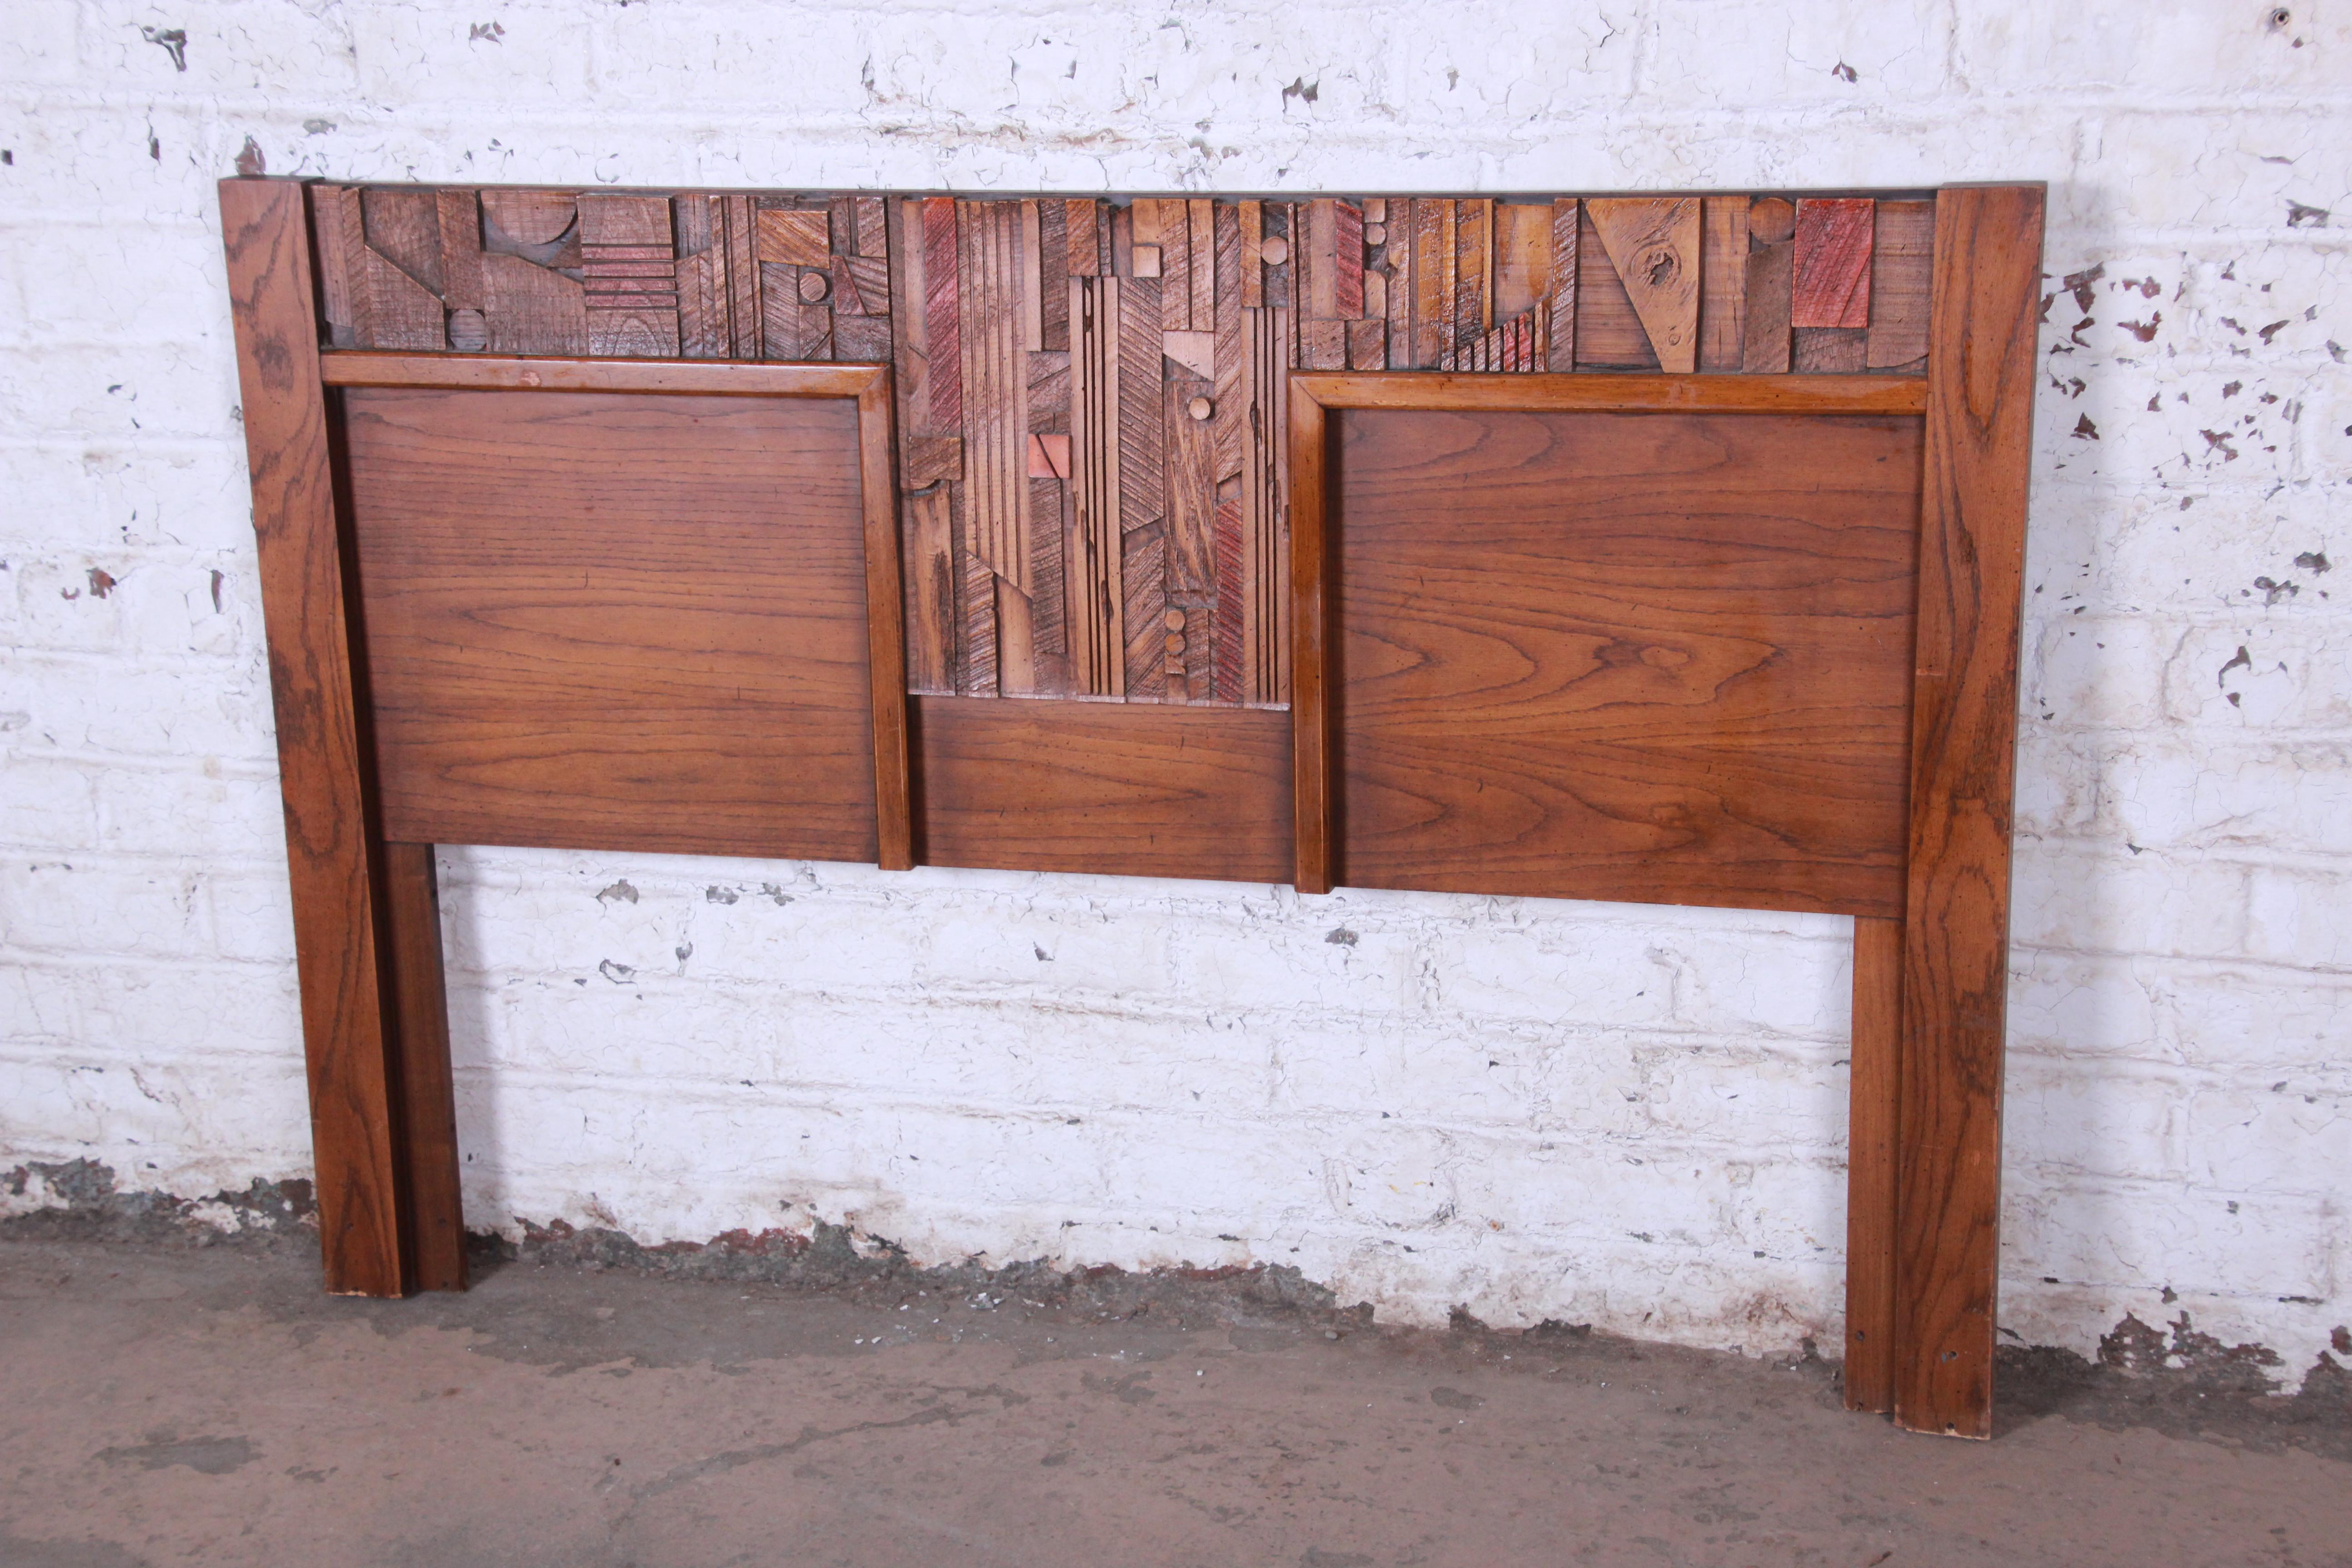 A gorgeous Mid-Century Modern Brutalist queen size headboard from the Pueblo collection by Lane. The headboard features beautiful oakwood grain and a unique Brutalist design in the style of Paul Evans. One of the more rare pieces from this highly